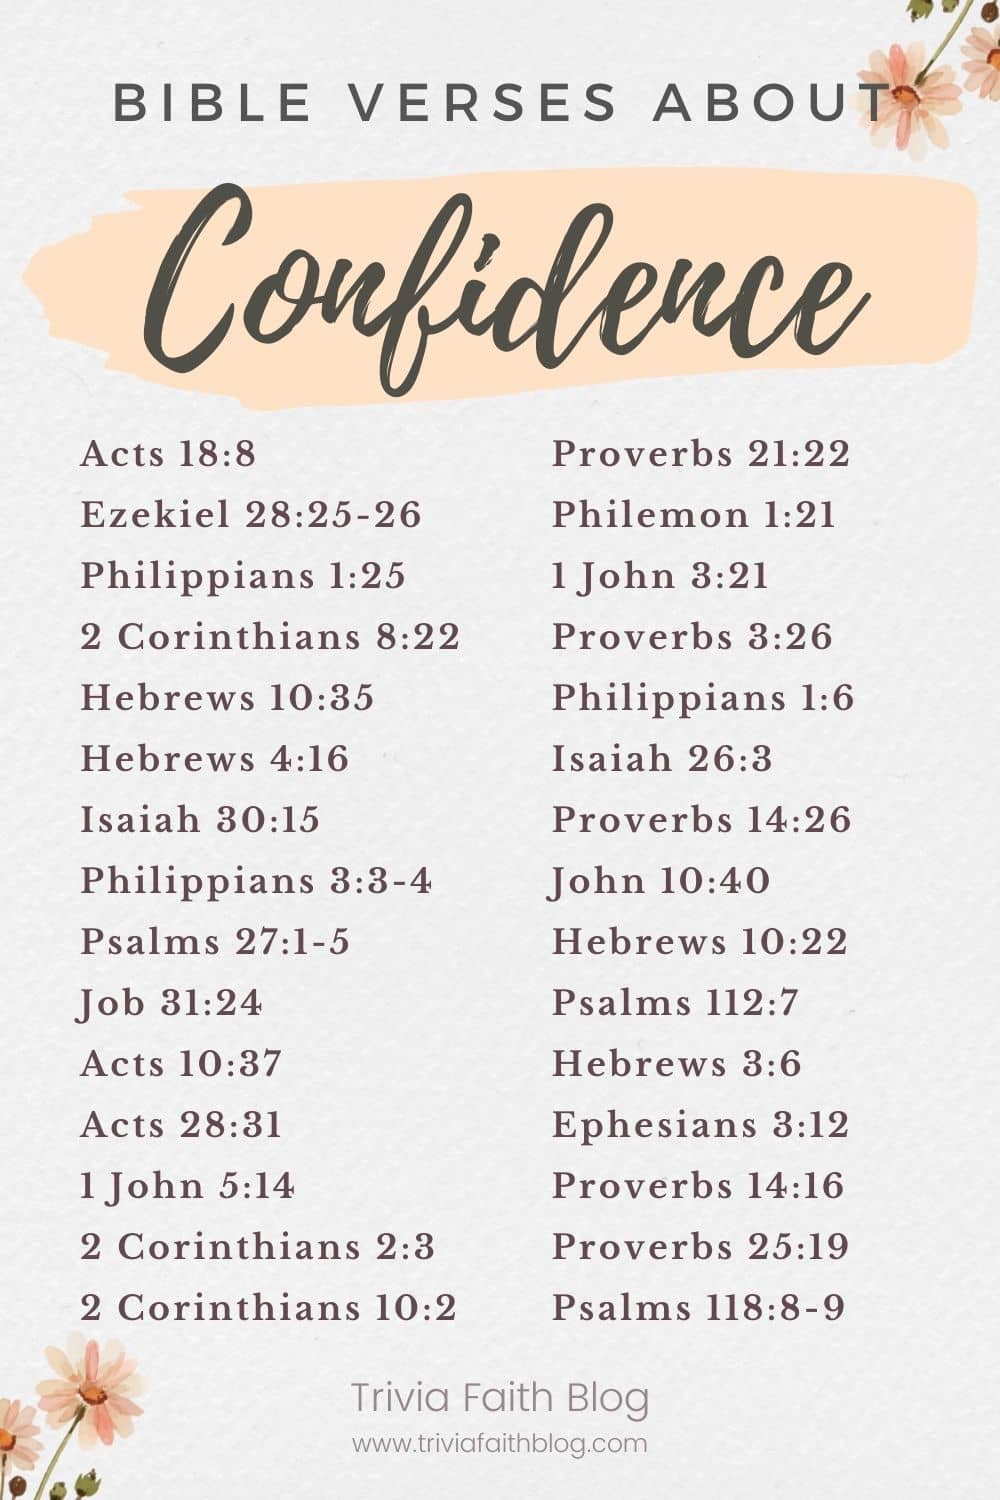 Bible verses on confidence